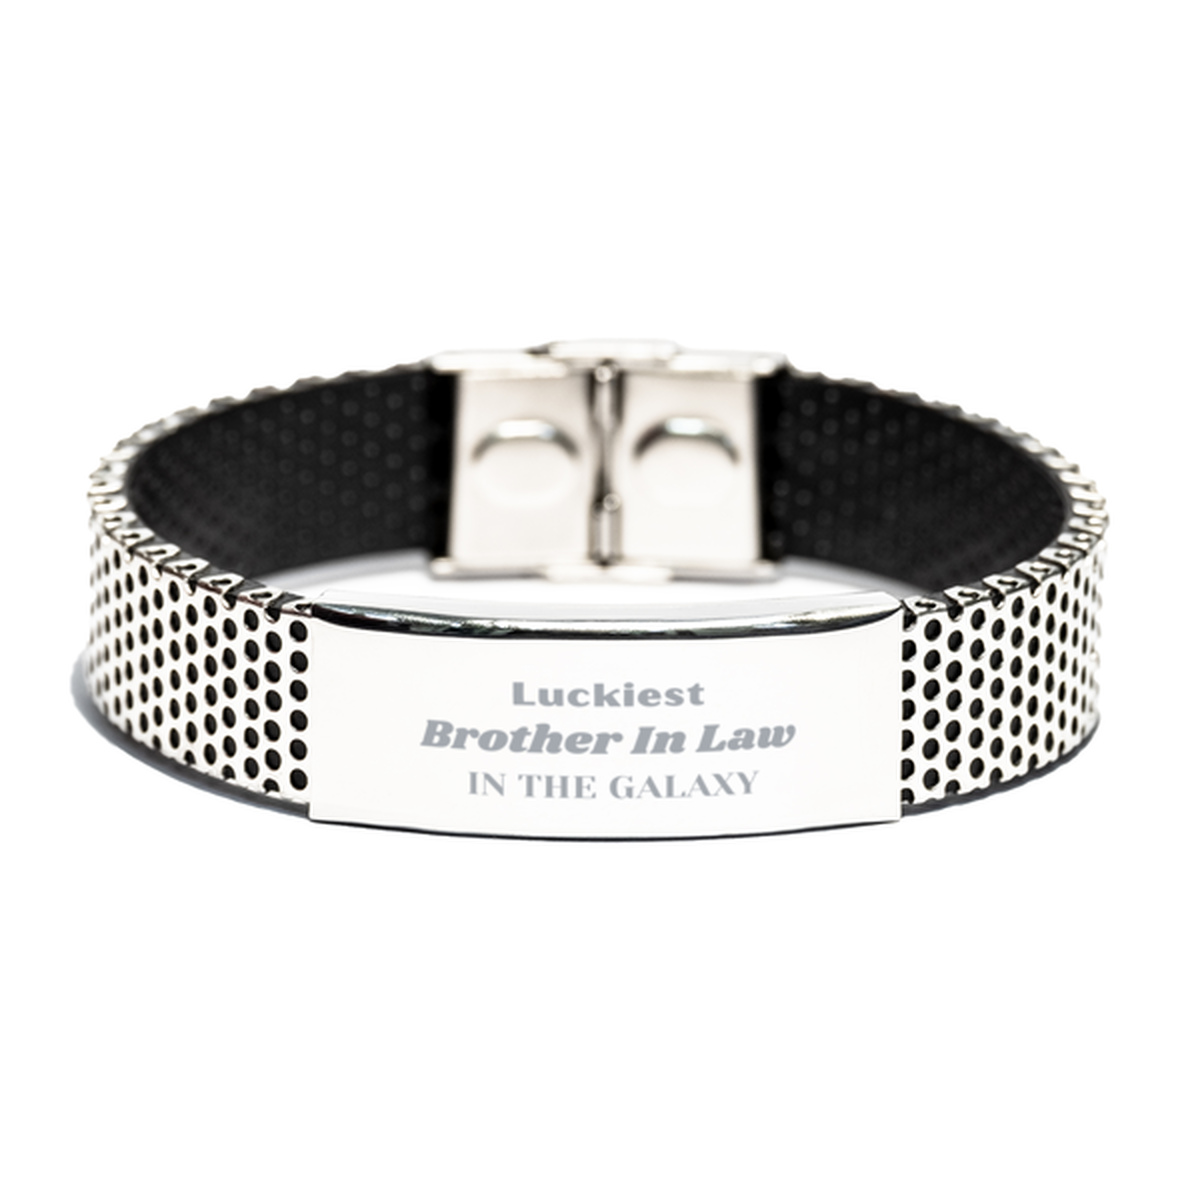 Luckiest Brother In Law in the Galaxy, To My Brother In Law Engraved Gifts, Christmas Brother In Law Stainless Steel Bracelet Gifts, X-mas Birthday Unique Gifts For Brother In Law Men Women